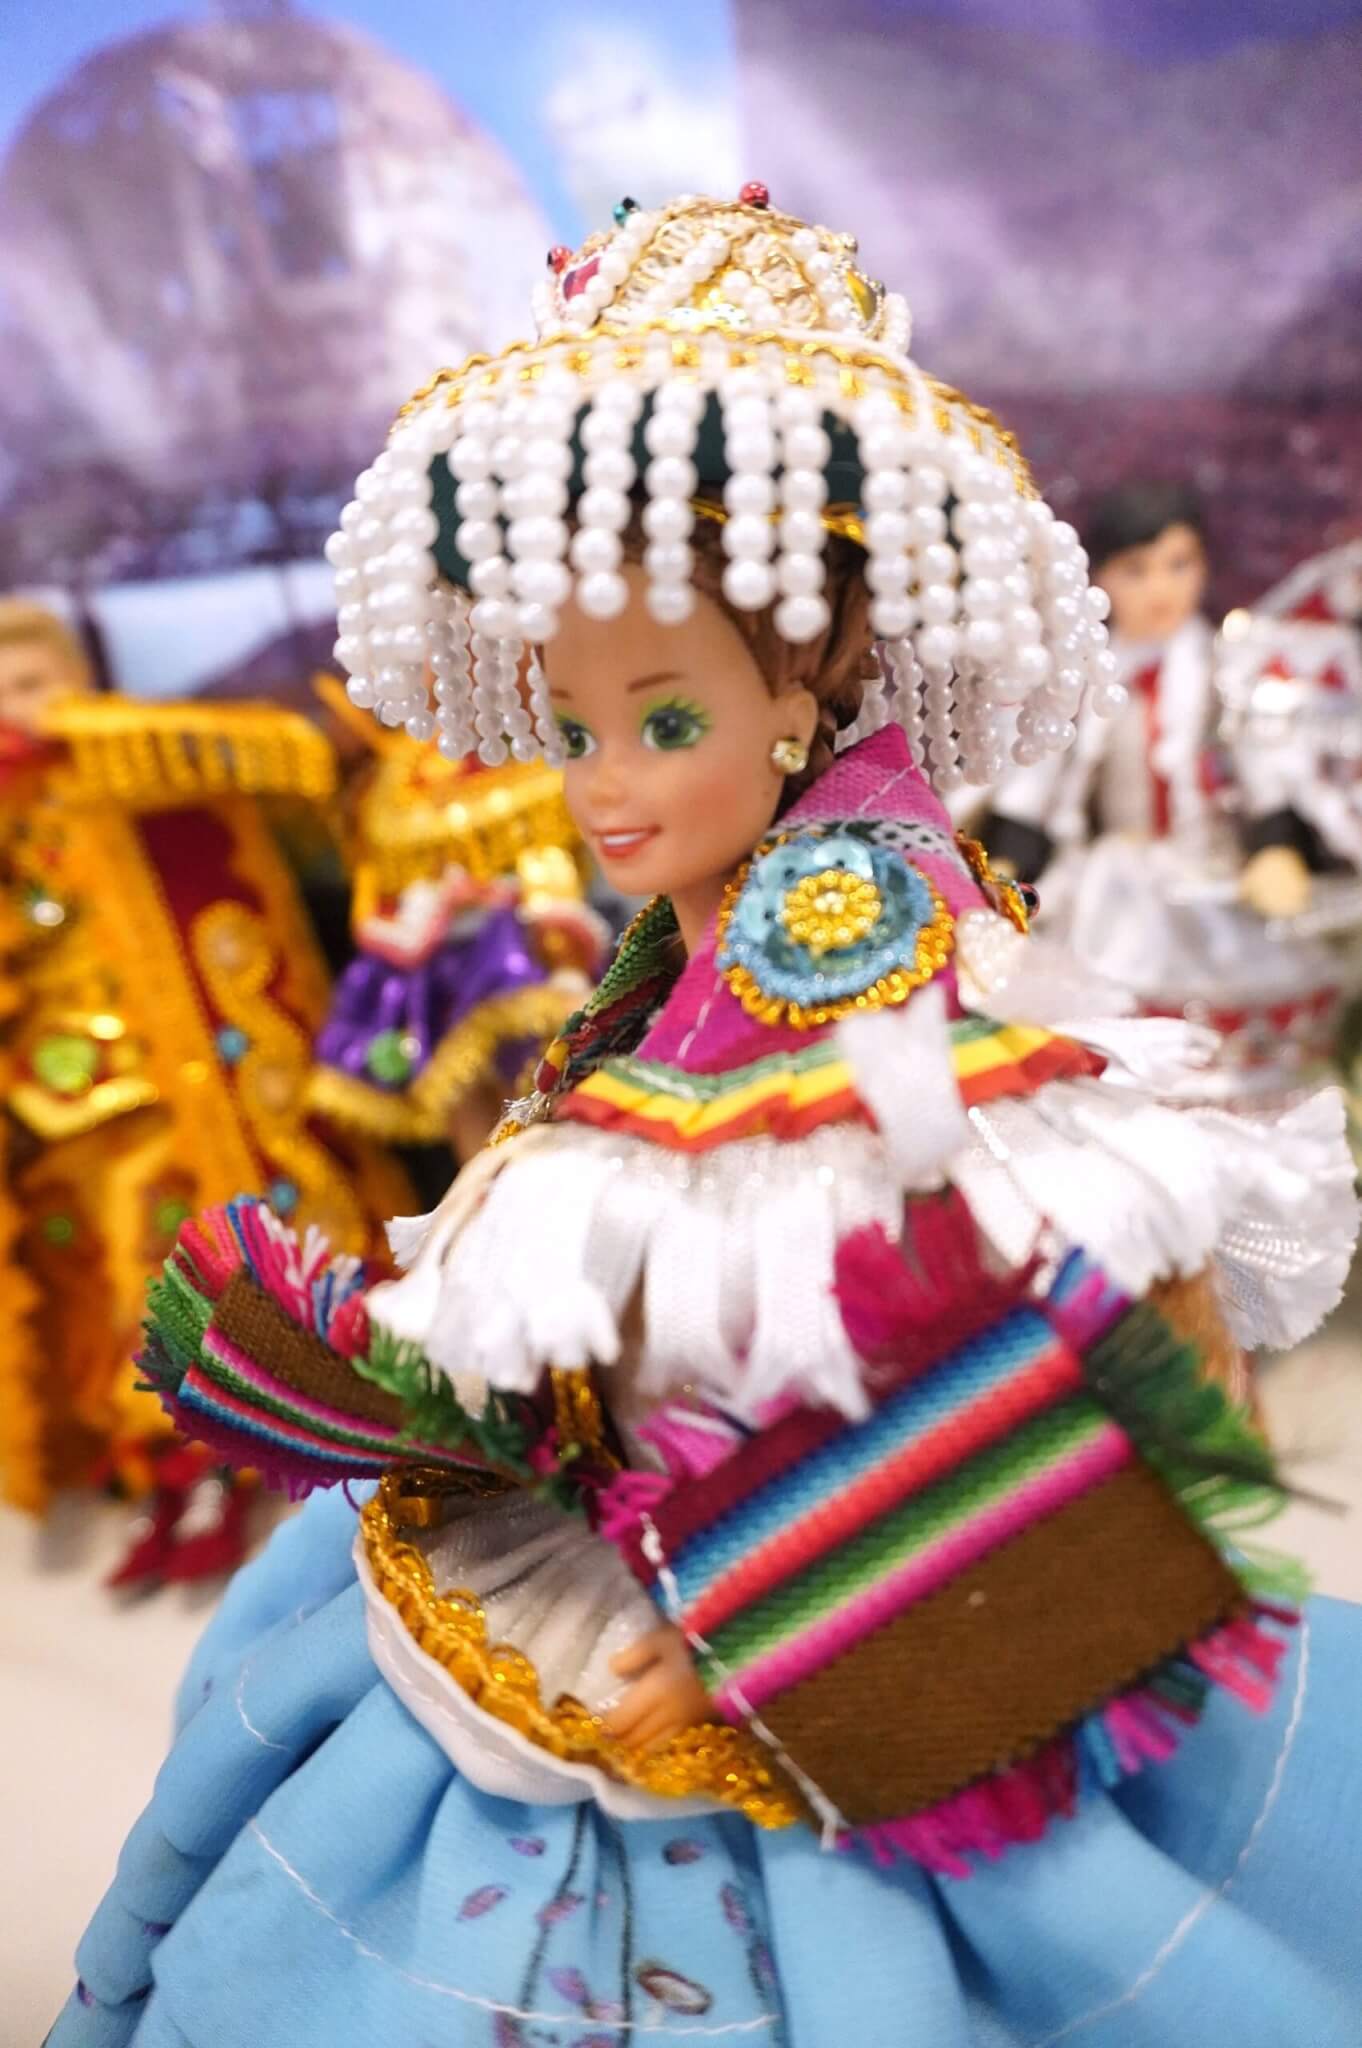 A Barbie doll dressed in the Bolivian kullawada dance tradition is displayed at an exhibition of more than 3,000 Barbie dolls in La Paz, Bolivia, 04 March 2023. Barbie, one of the most famous dolls in the world, was displayed in colorful garments from Bolivian indigenous cultures and folk dances for its 64th anniversary.